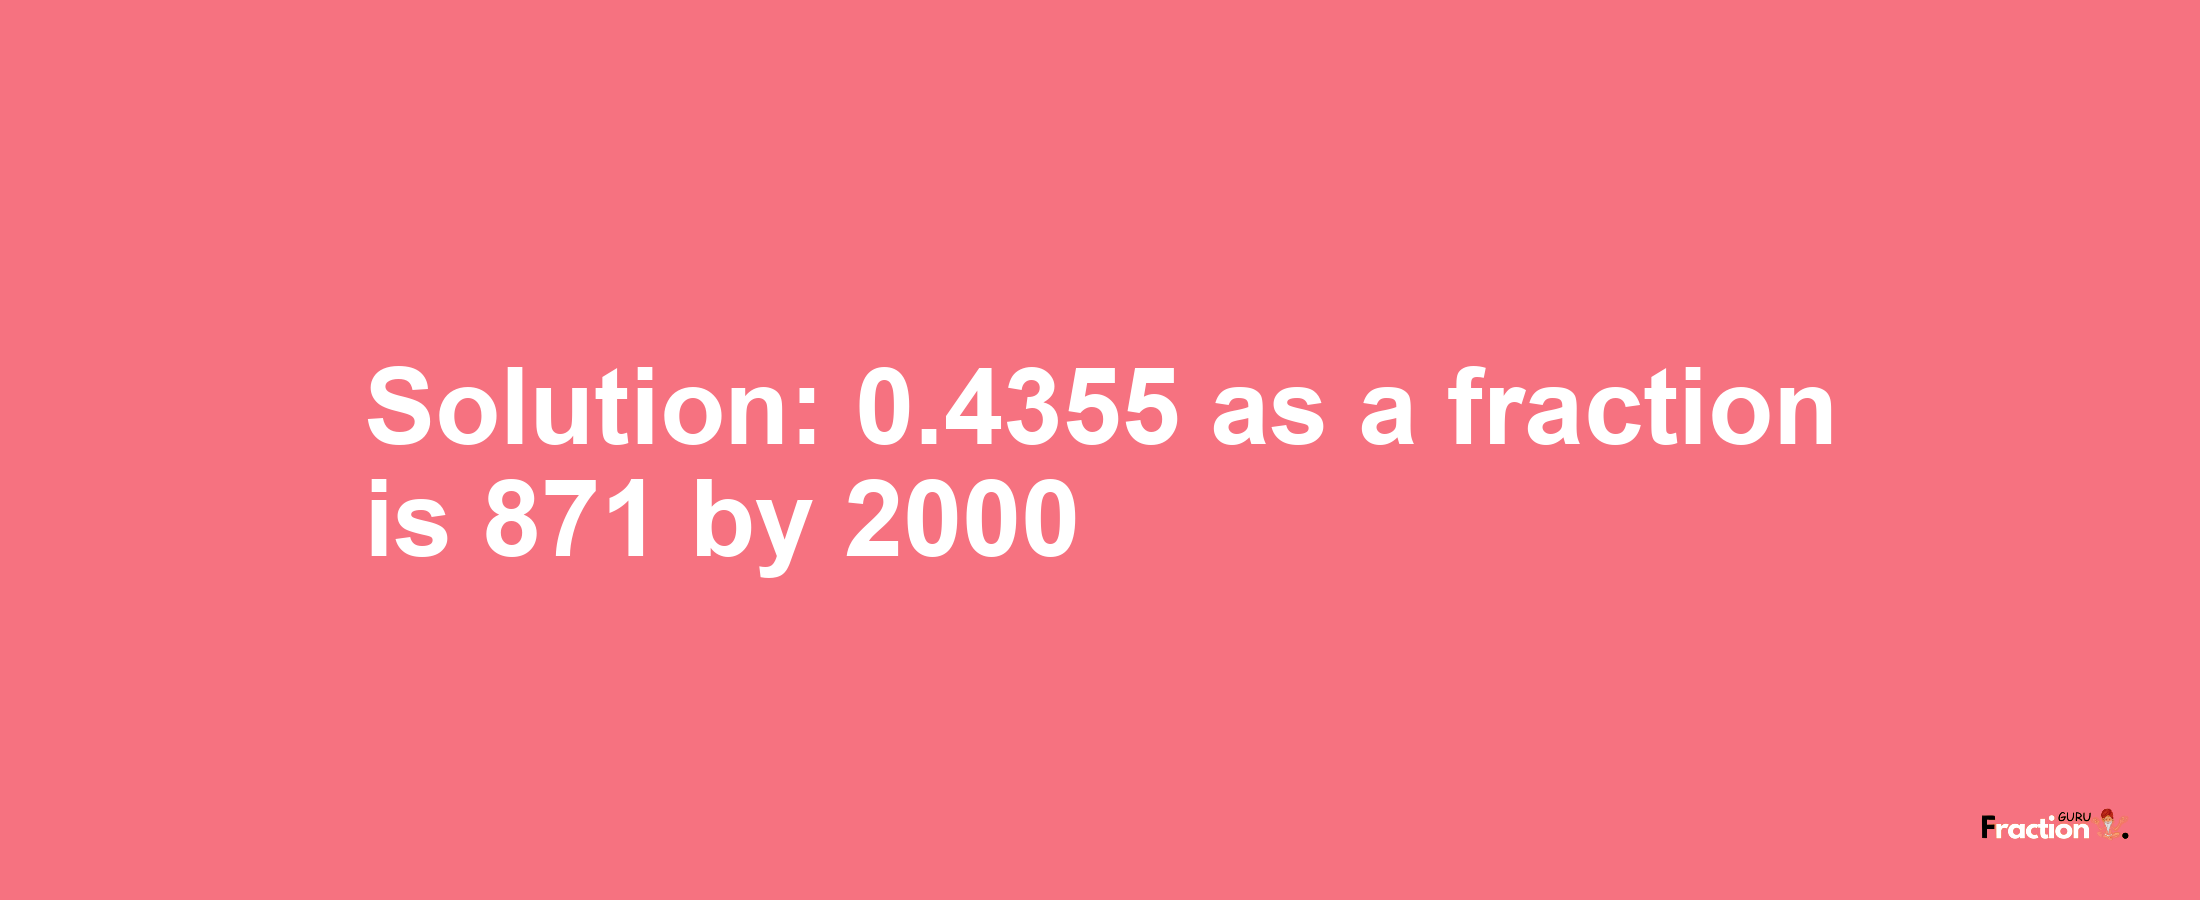 Solution:0.4355 as a fraction is 871/2000